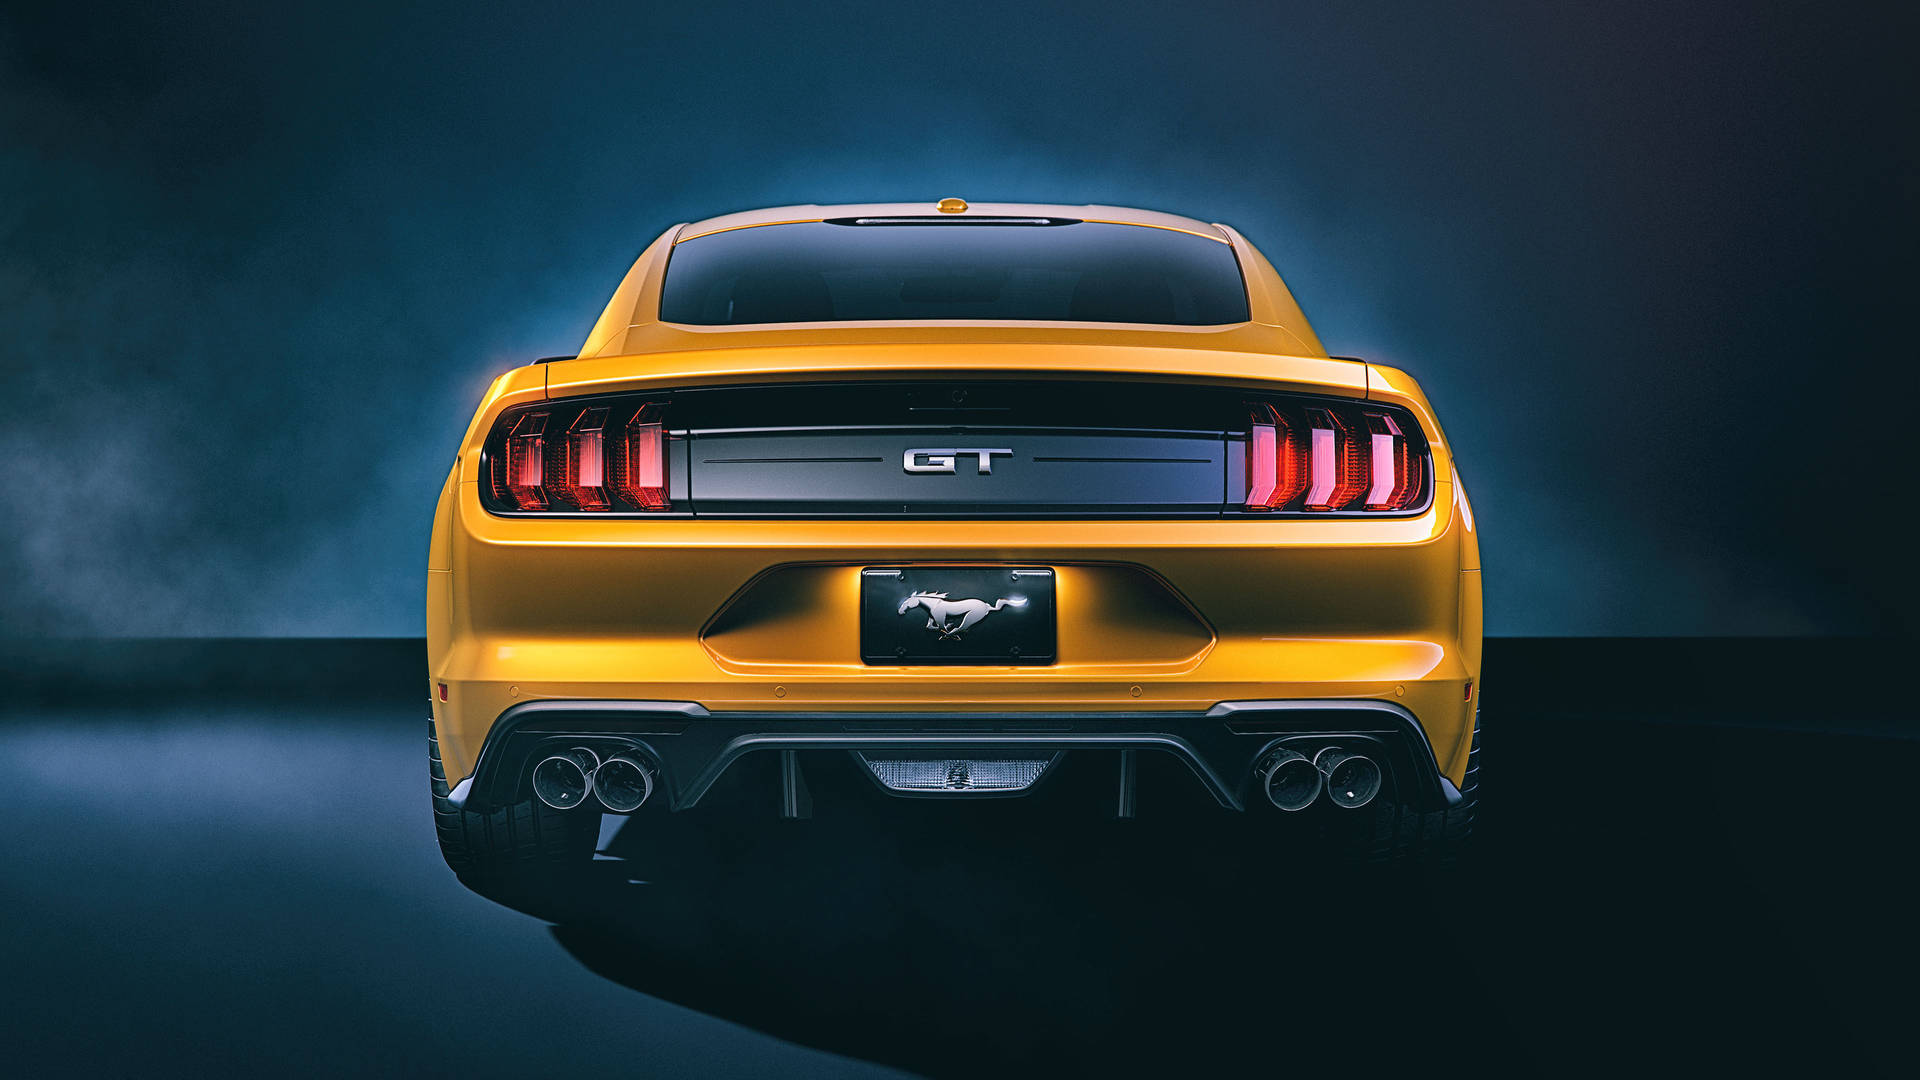 The Rear End Of A Yellow Mustang Wallpaper